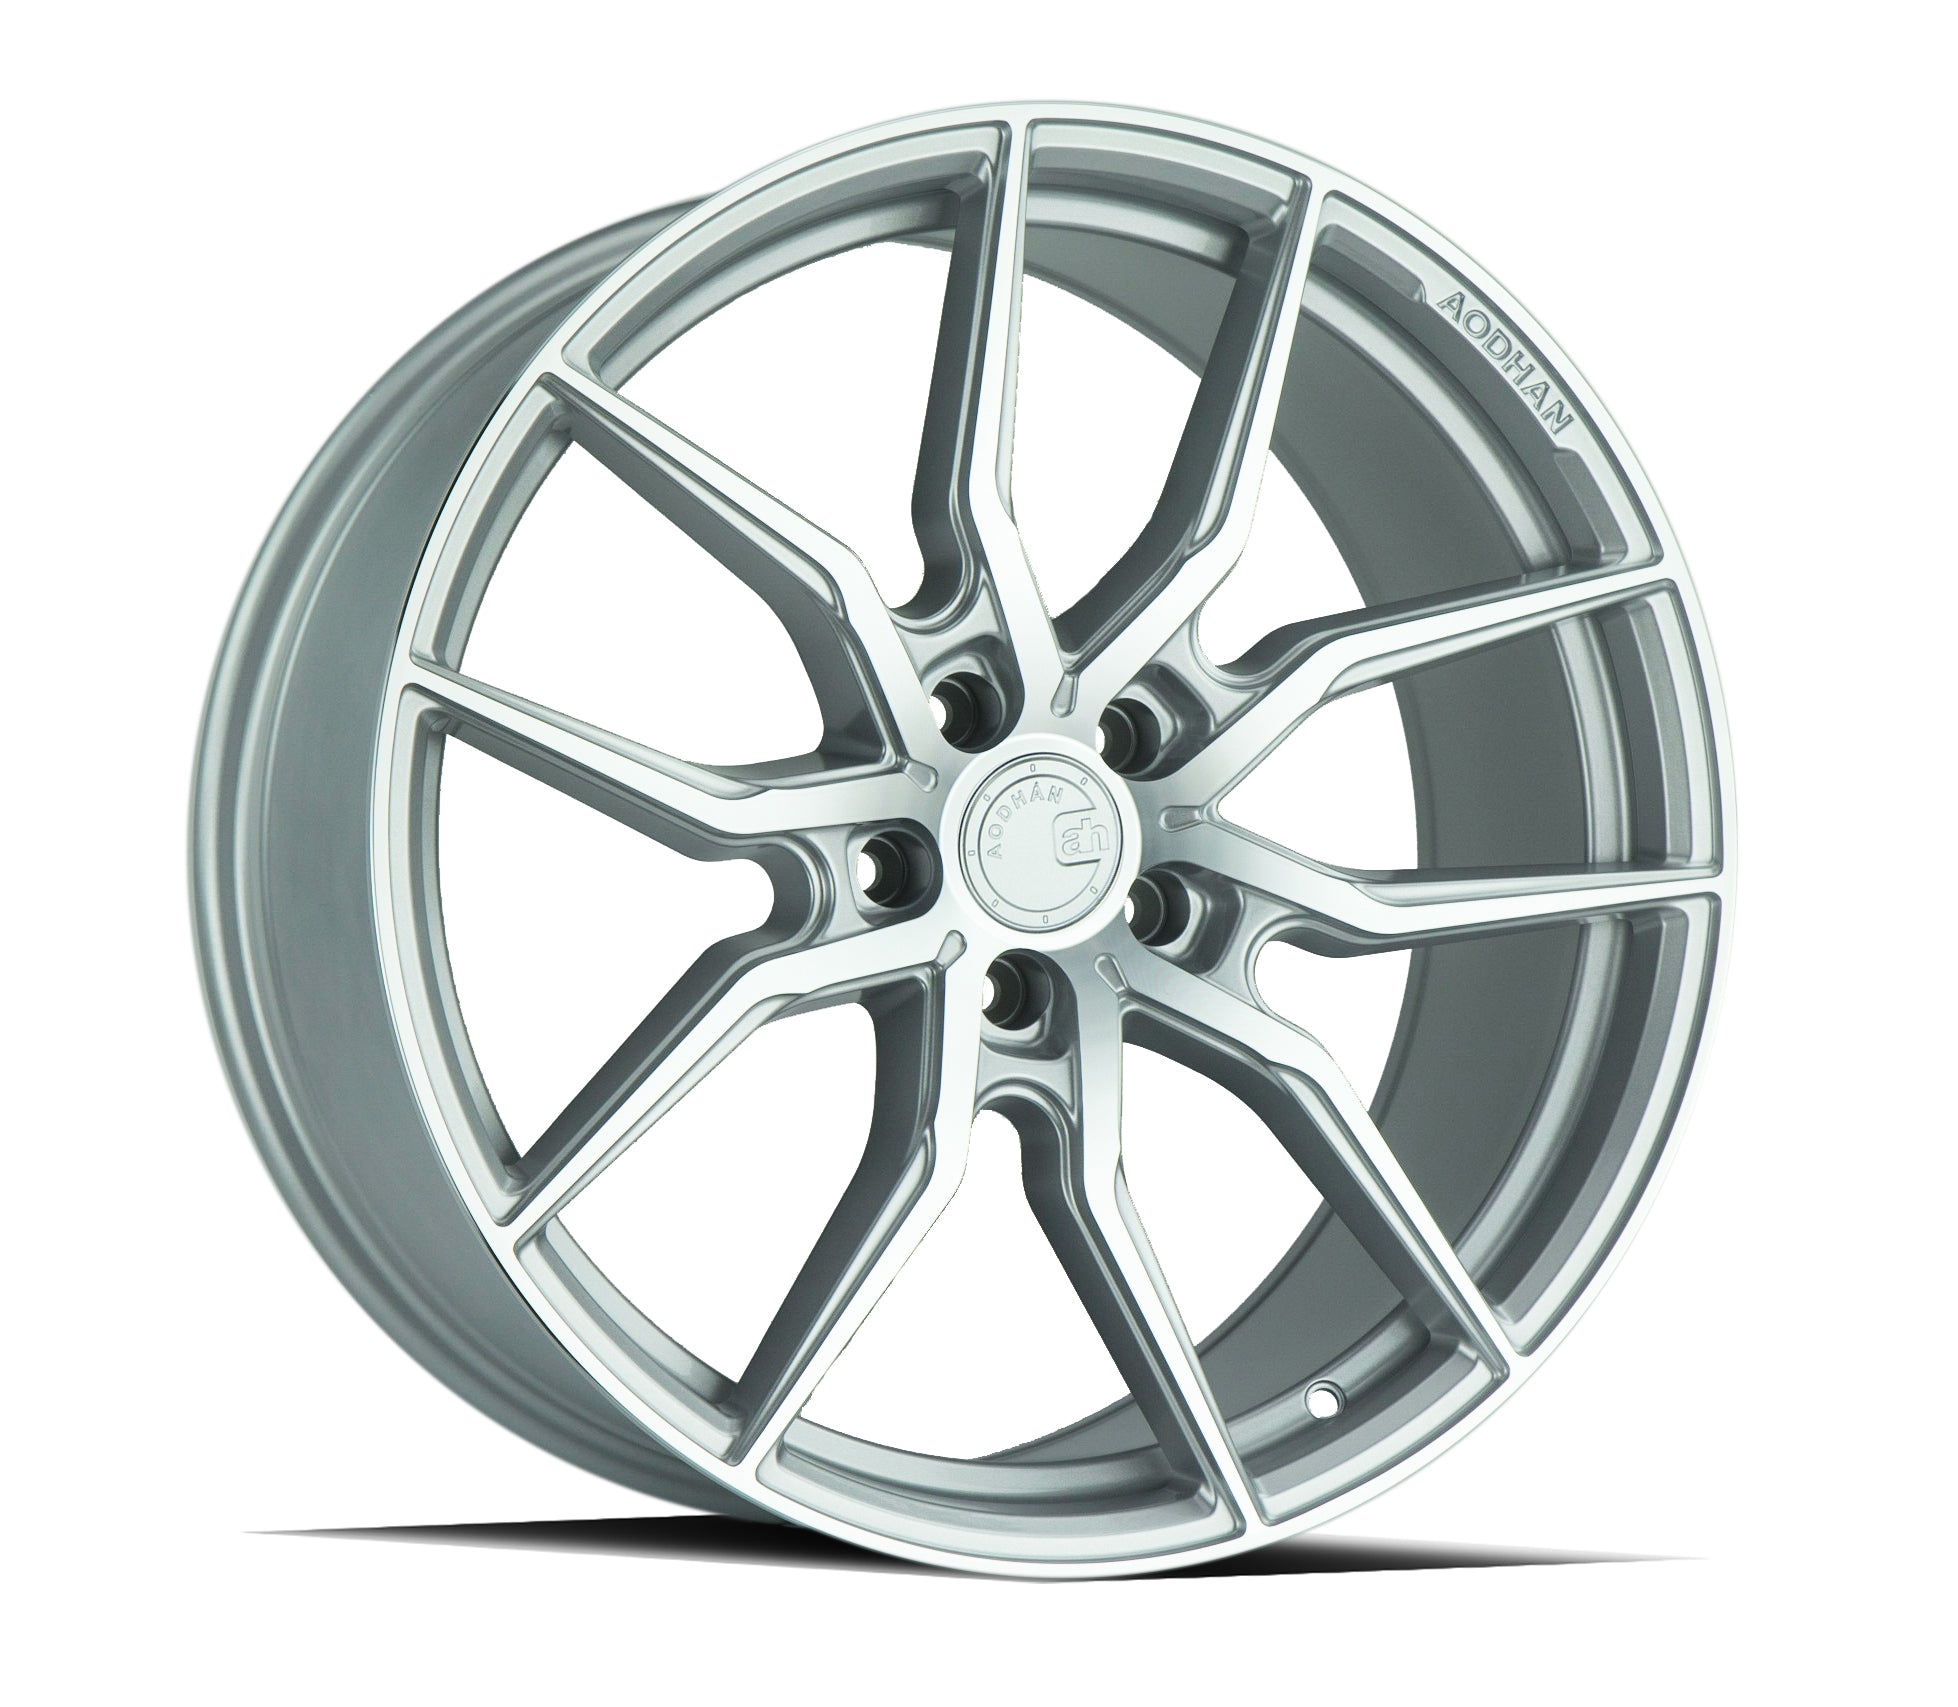 Aodhan AFF1 20x9 5x114.3 +32 Gloss Silver Machined Face